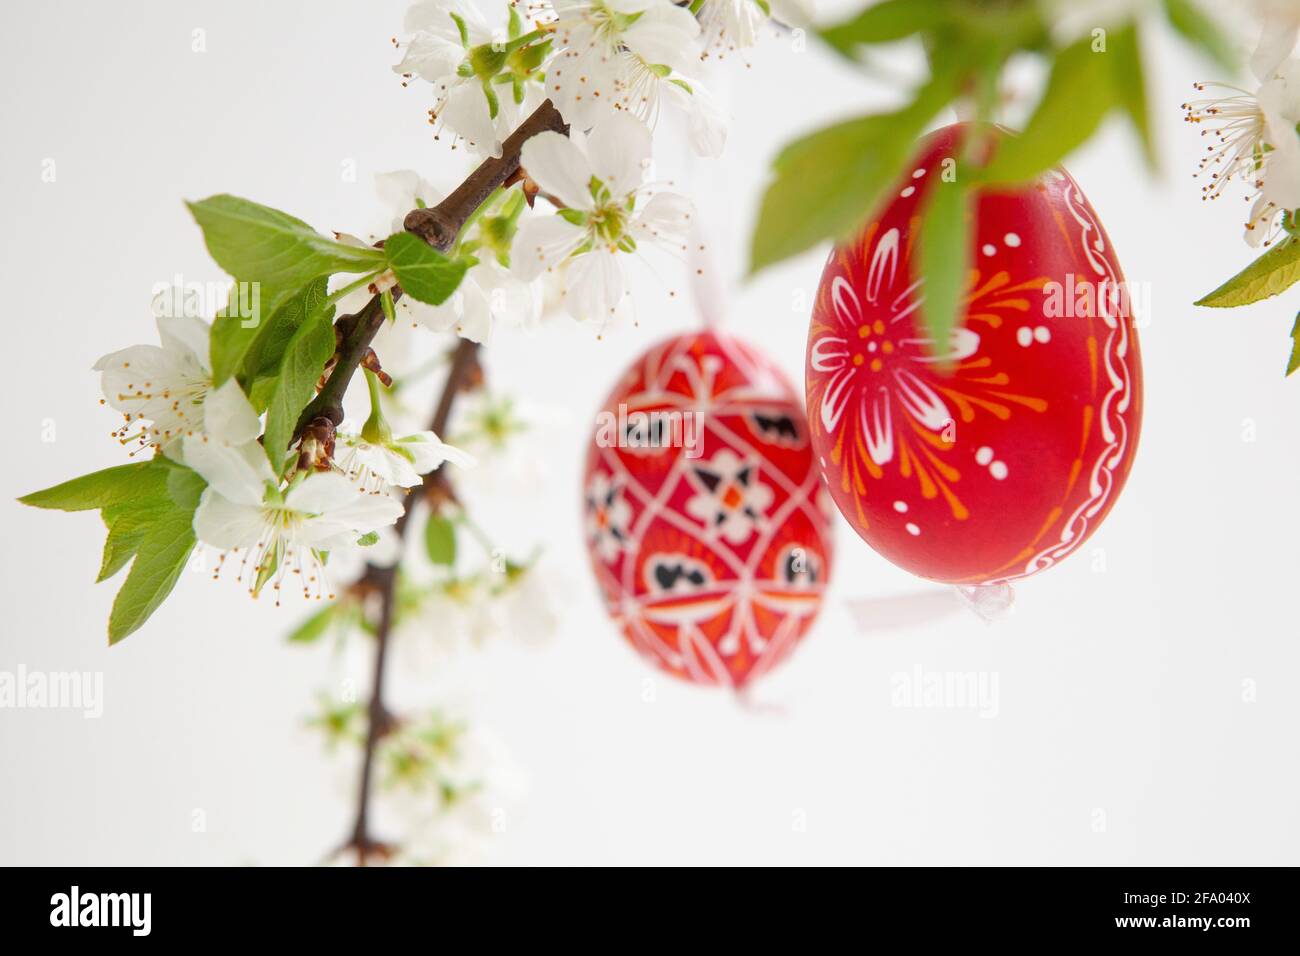 Easter eggs from the Czech Republic, painted red or dyed with wax resist, hanging on branches of plum blossom against a white background. Anna Watson/ Stock Photo